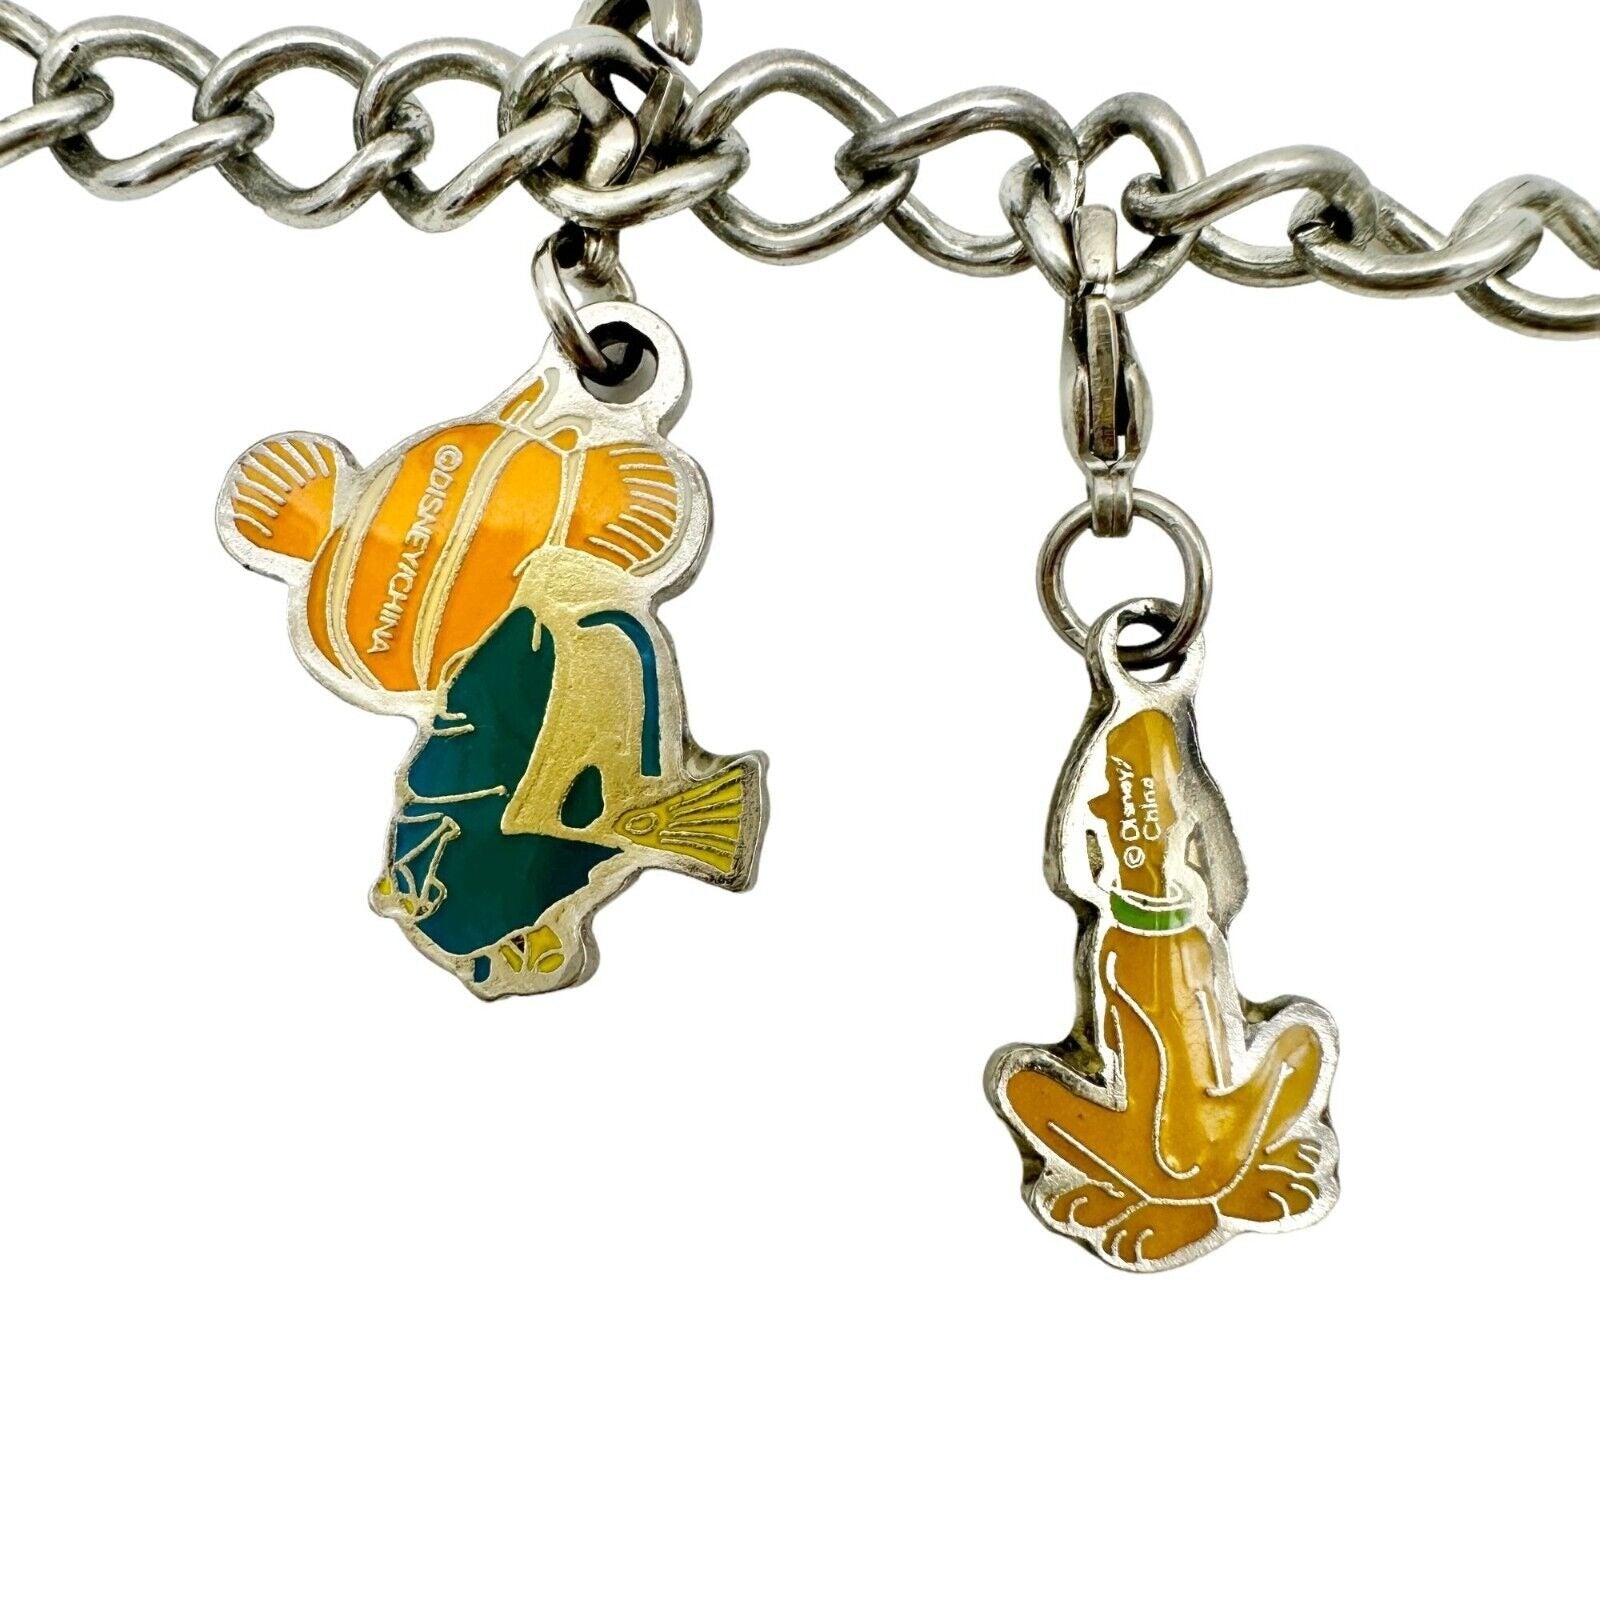 Charm Bracelet, Disney Original Tinkerbell, Mickey Mouse, the Magic Kingdom  Castle, Cinderella, Pluto, the Pumpkin Carriage, and More - Etsy